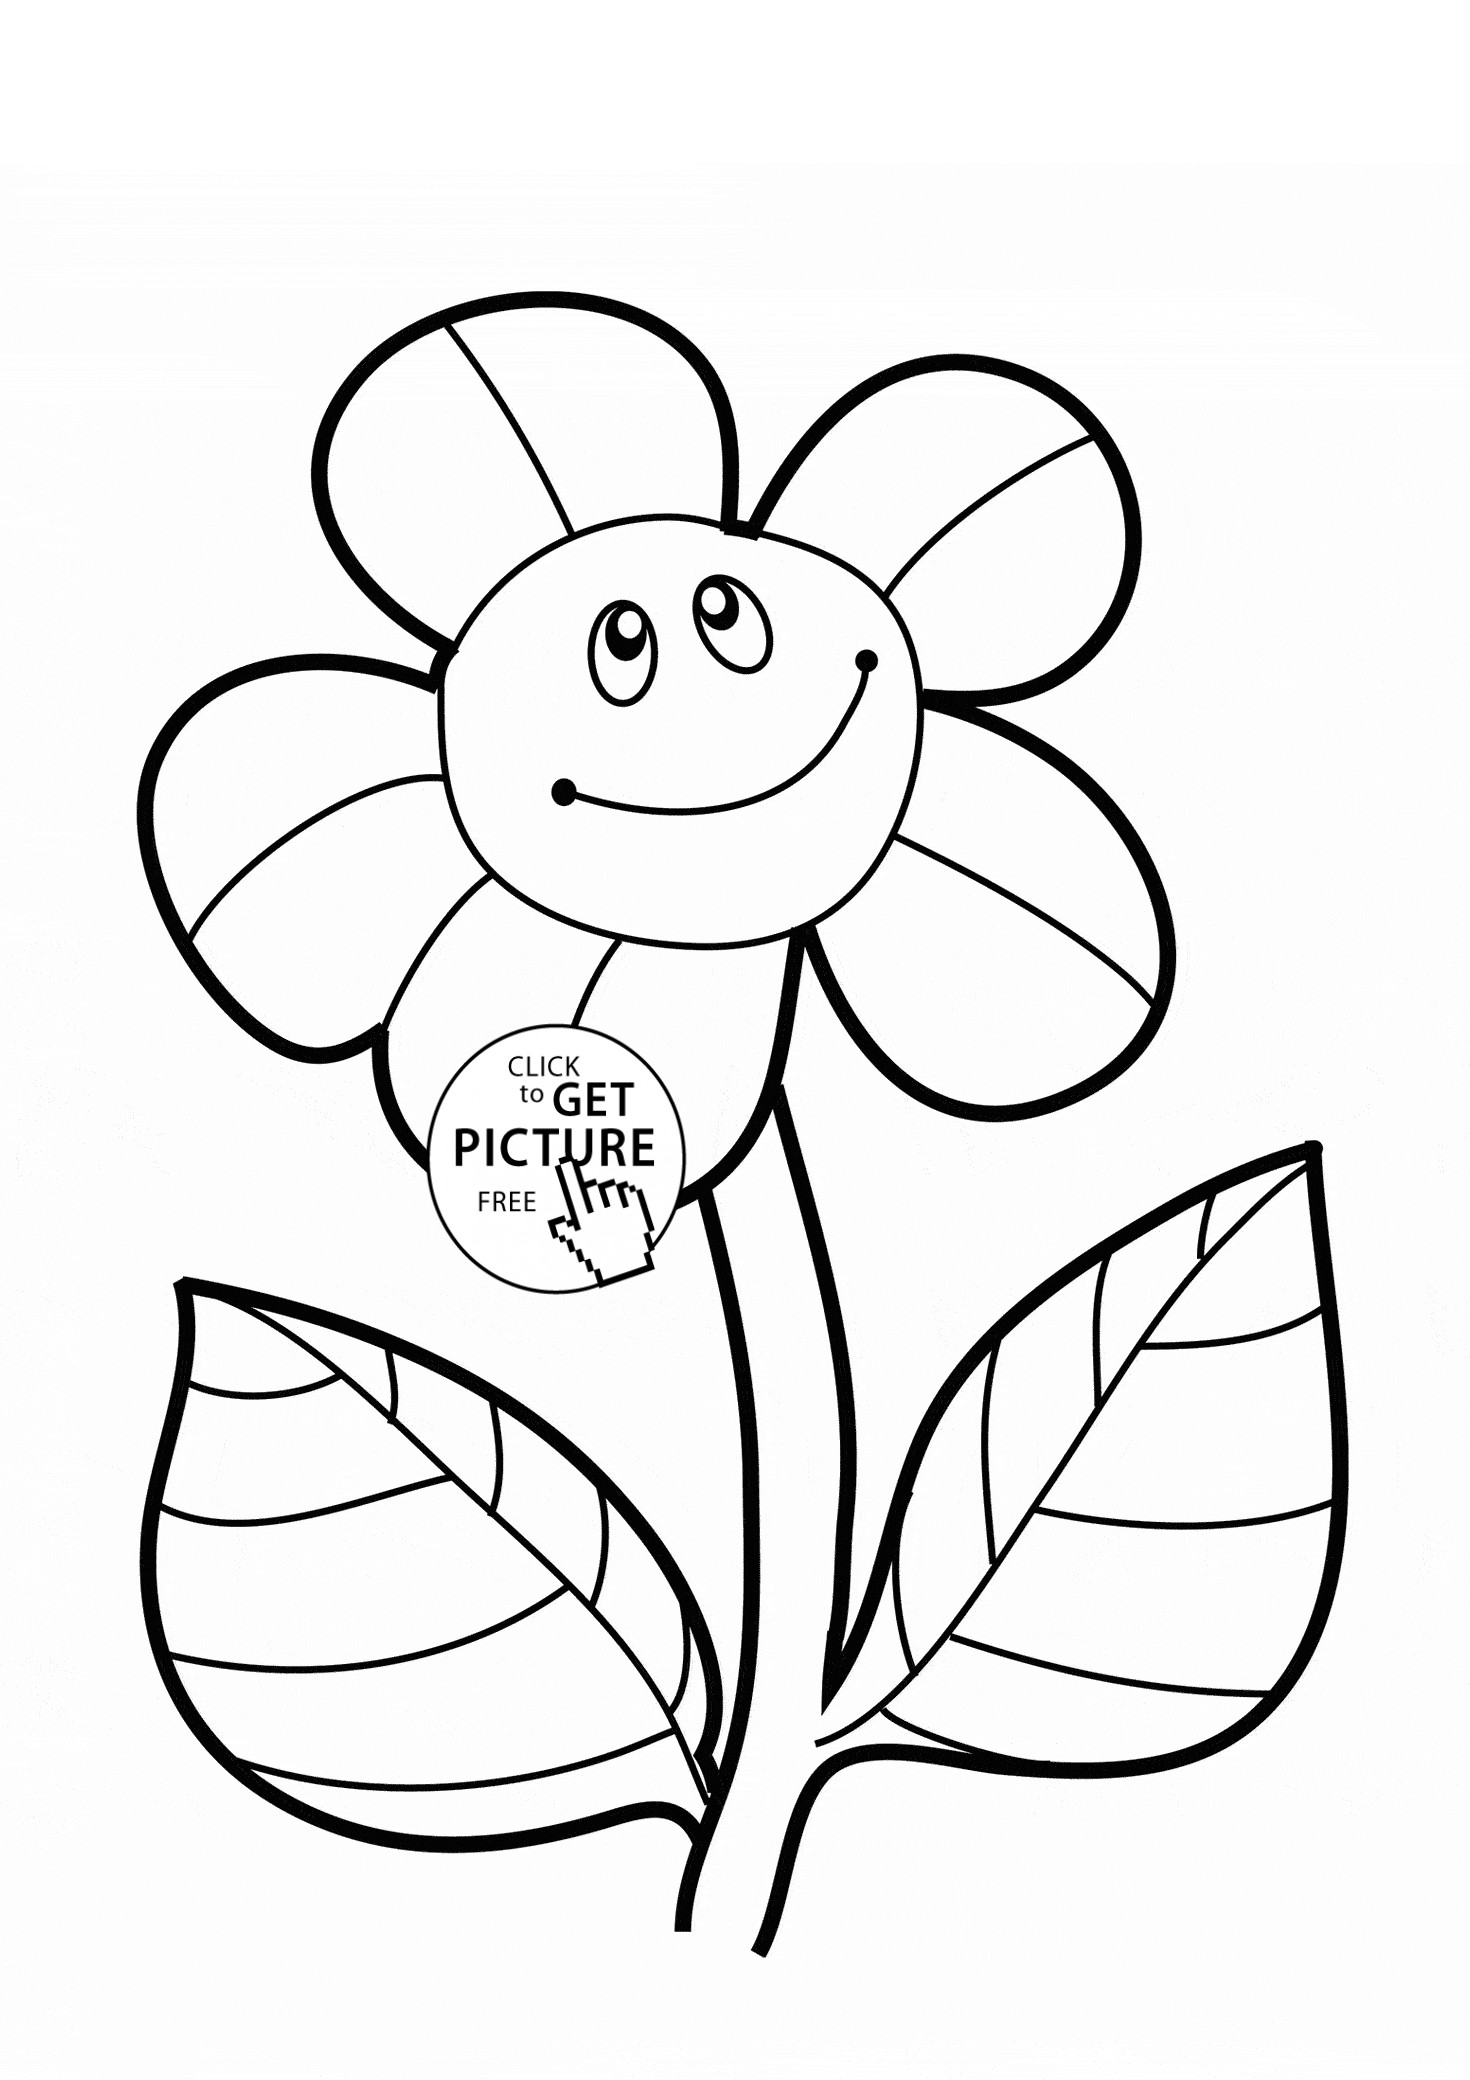 Free Flower Coloring Pages For Kids
 Awesome Flower Coloring Pages to Print